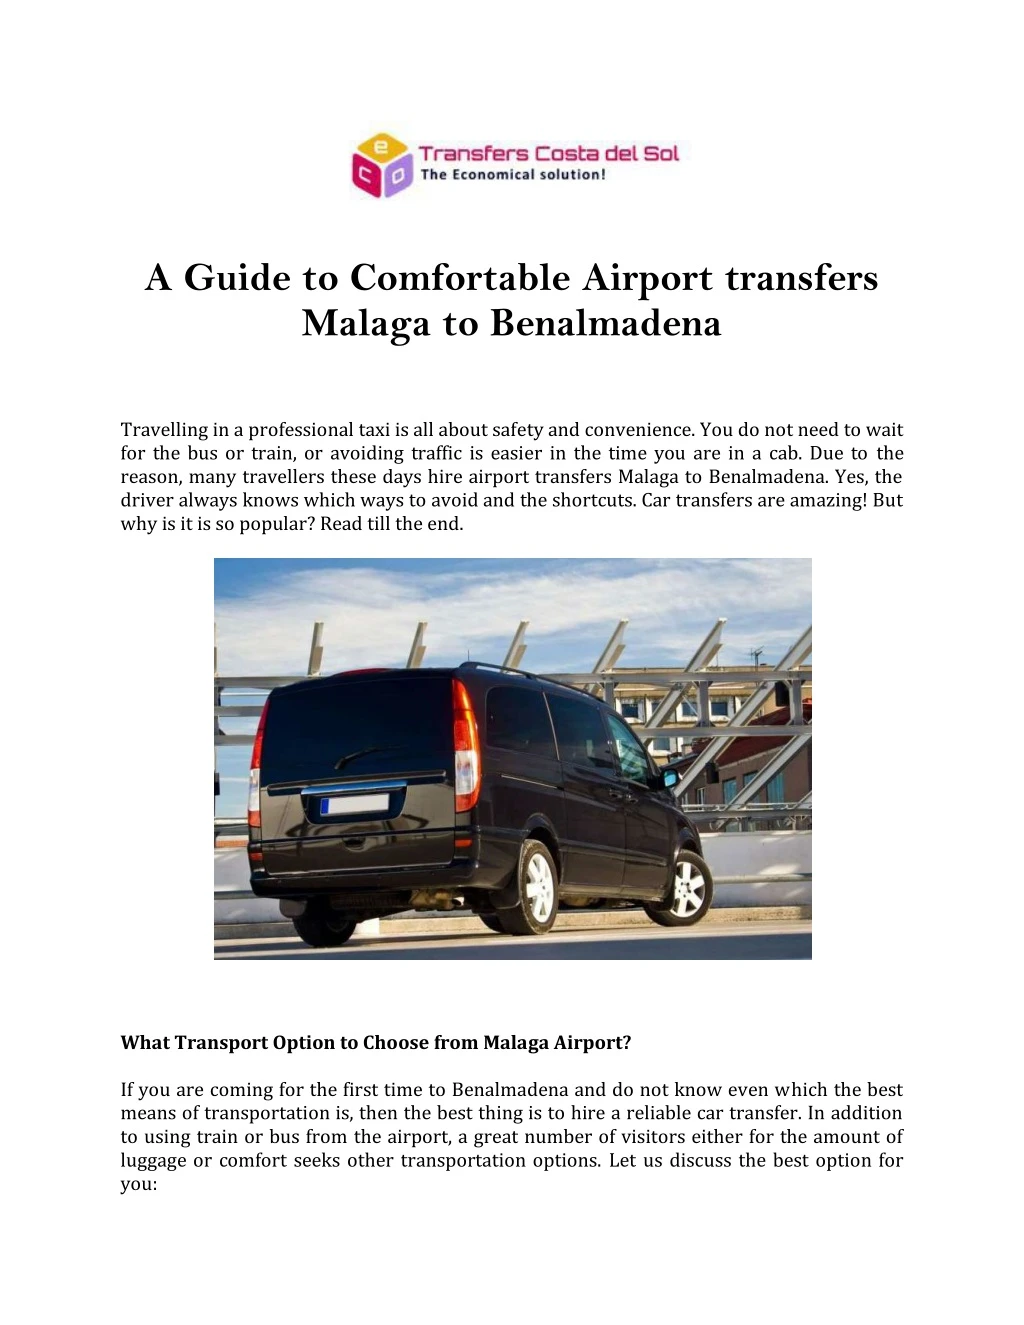 a guide to comfortable airport transfers malaga